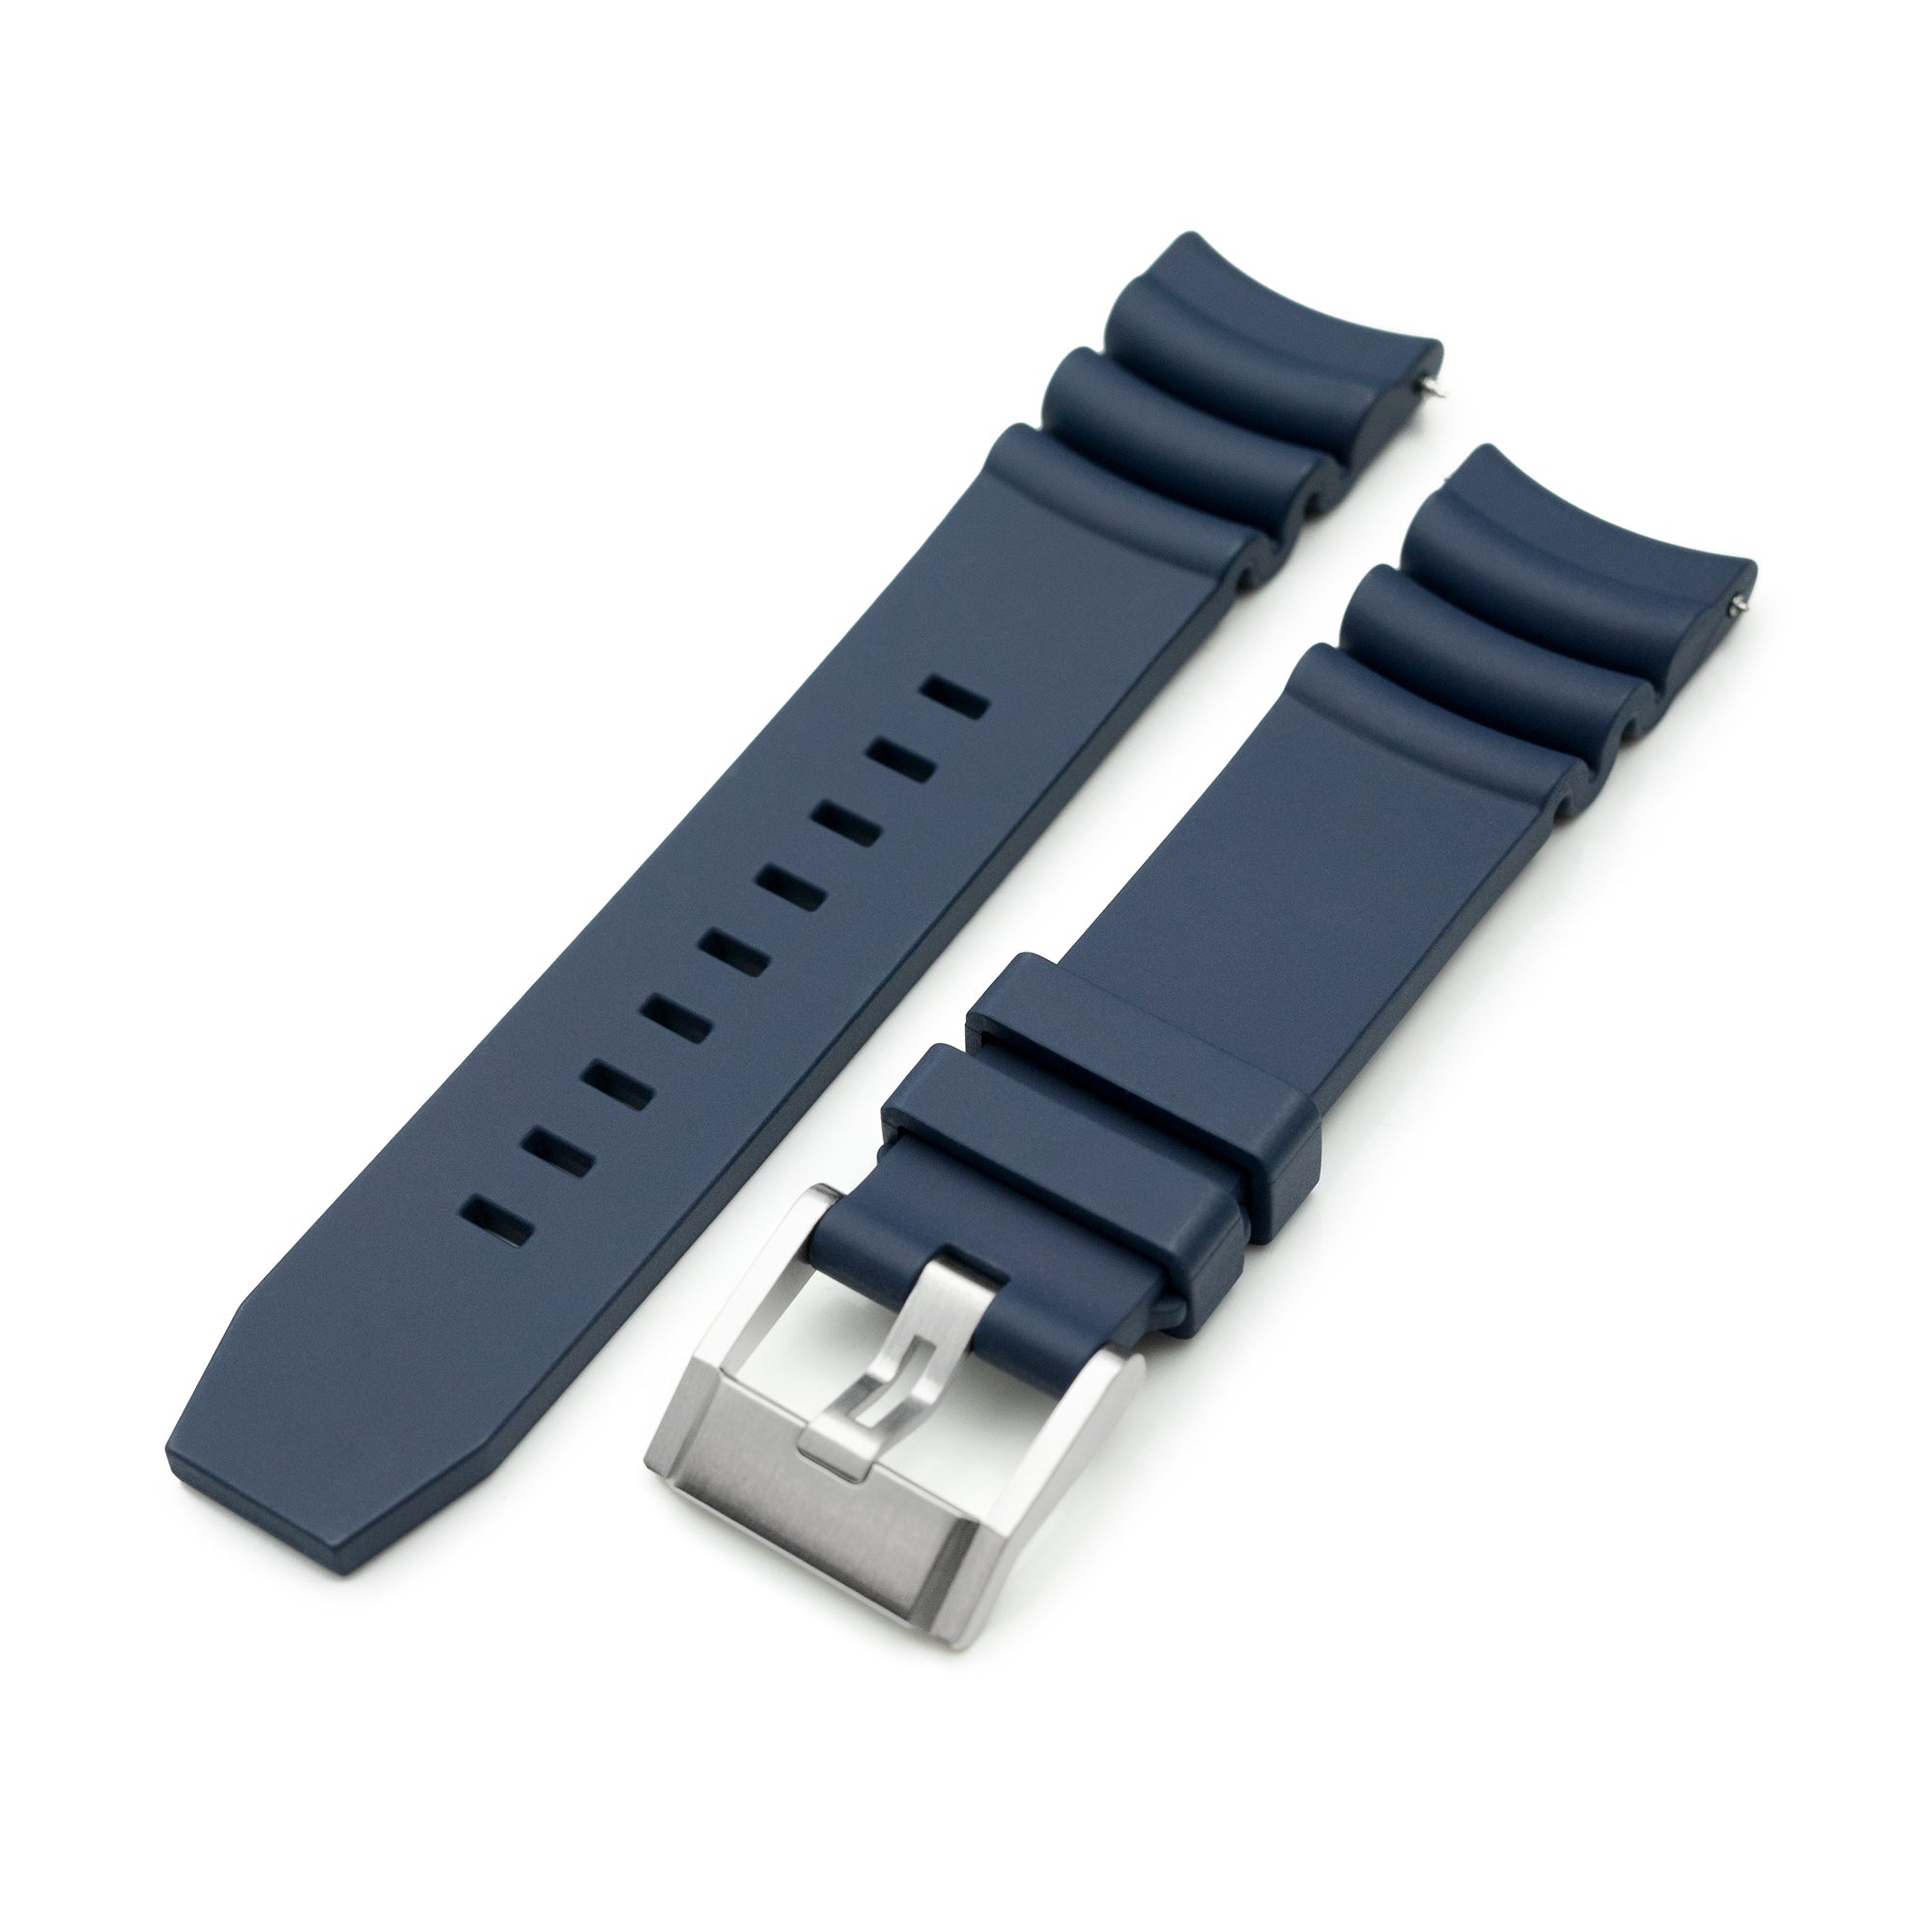 Firewave Resilient Cuved End FKM rubber Watch Strap, Navy Blue Strapcode Watch Bands